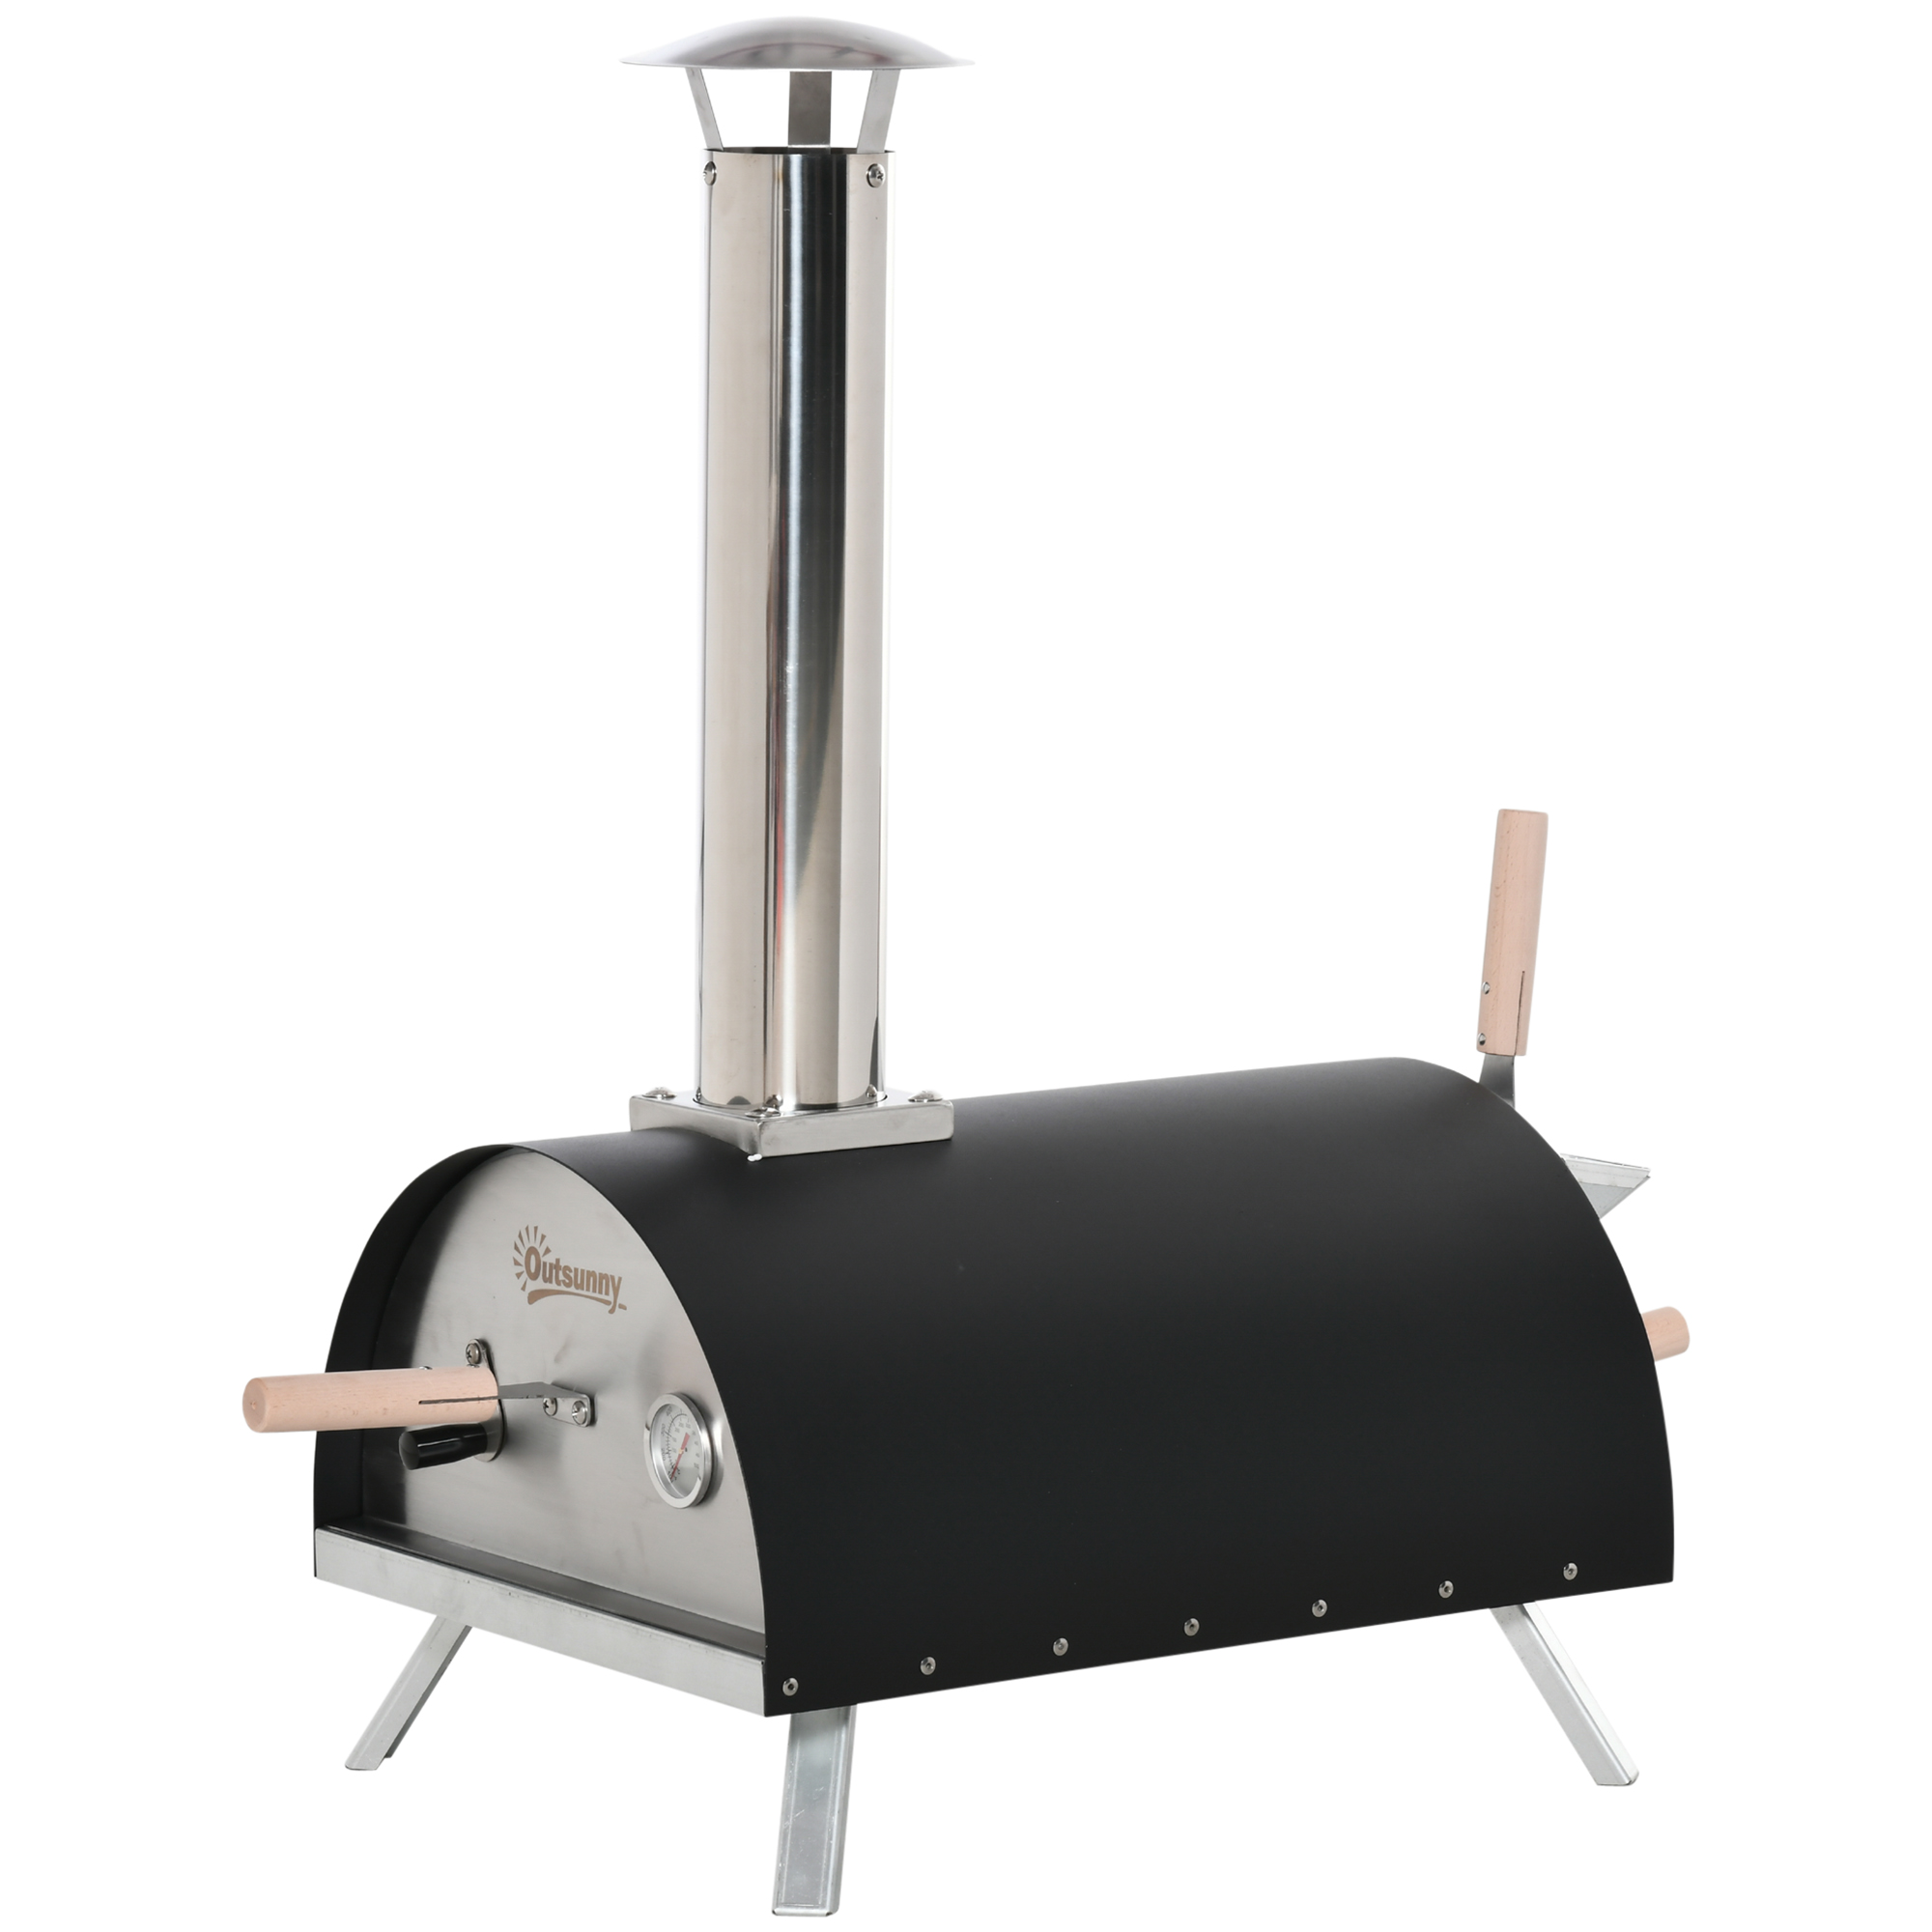 Outdoor Portable Pizza Oven